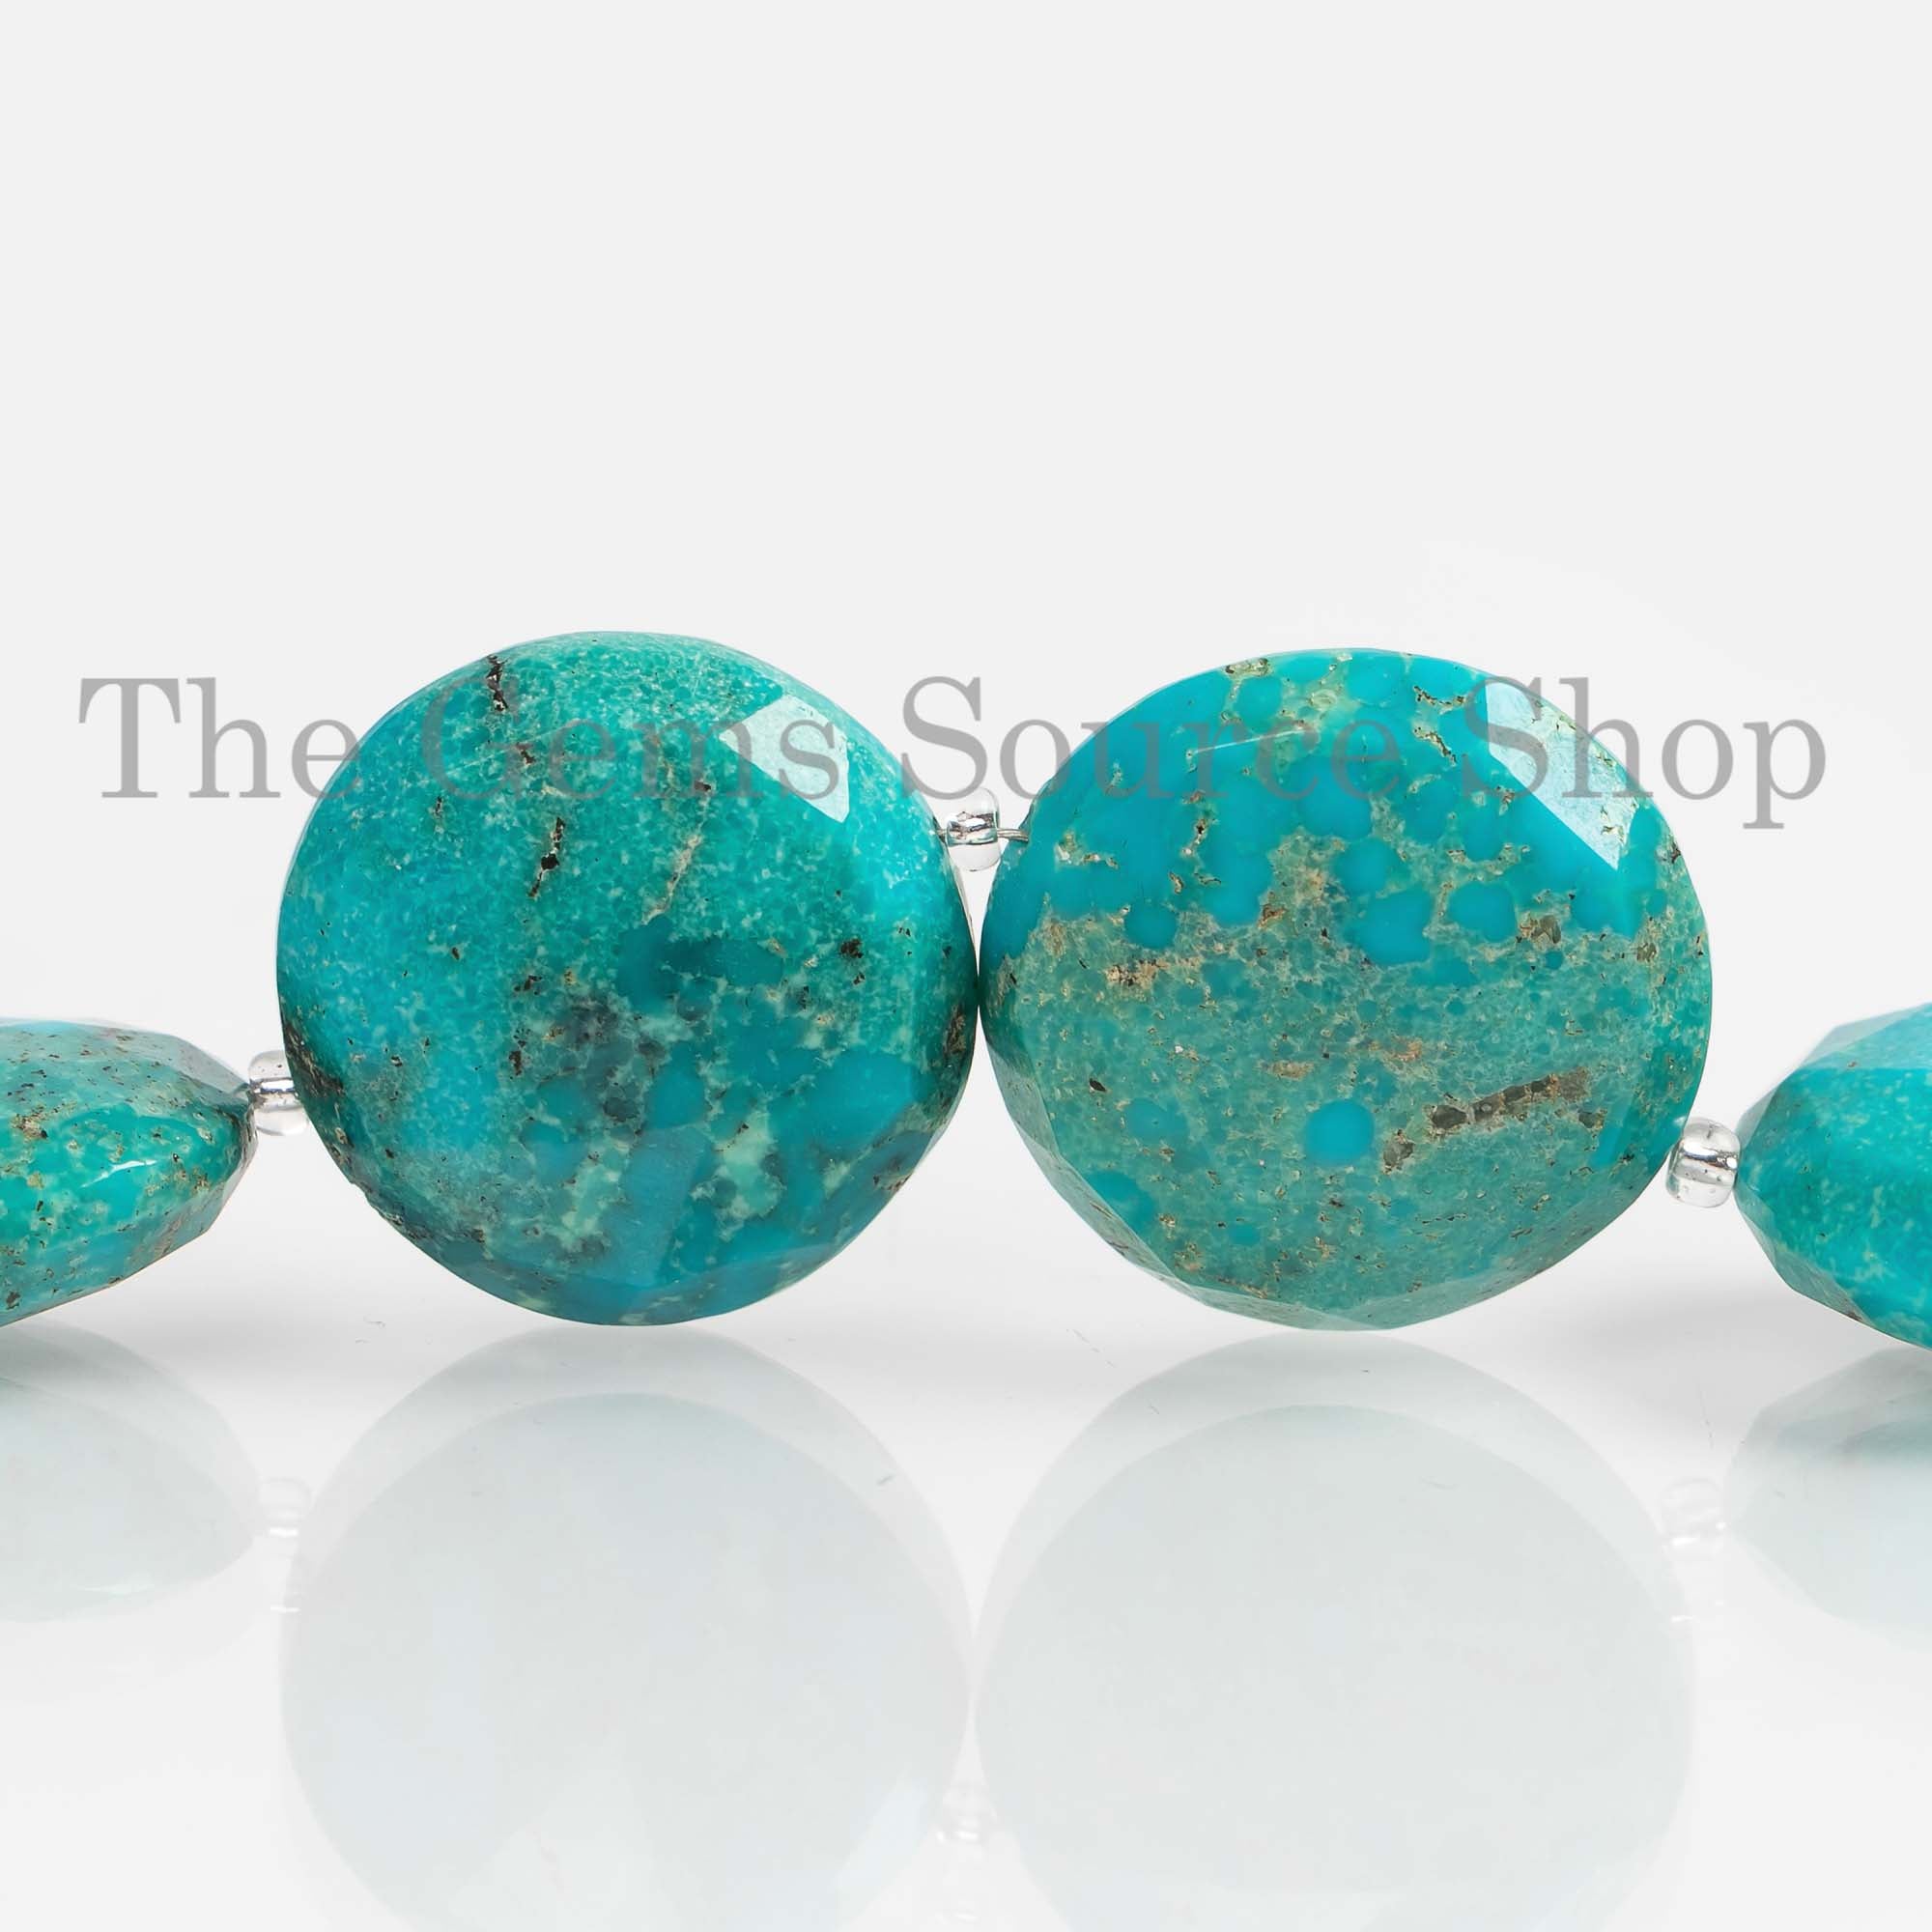 Arizona Turquoise Coin Briolette, 15-21mm Turquoise Round Coin Beads, Turquoise Faceted Beads, Coin Beads, Wholesale Beads Jewelry